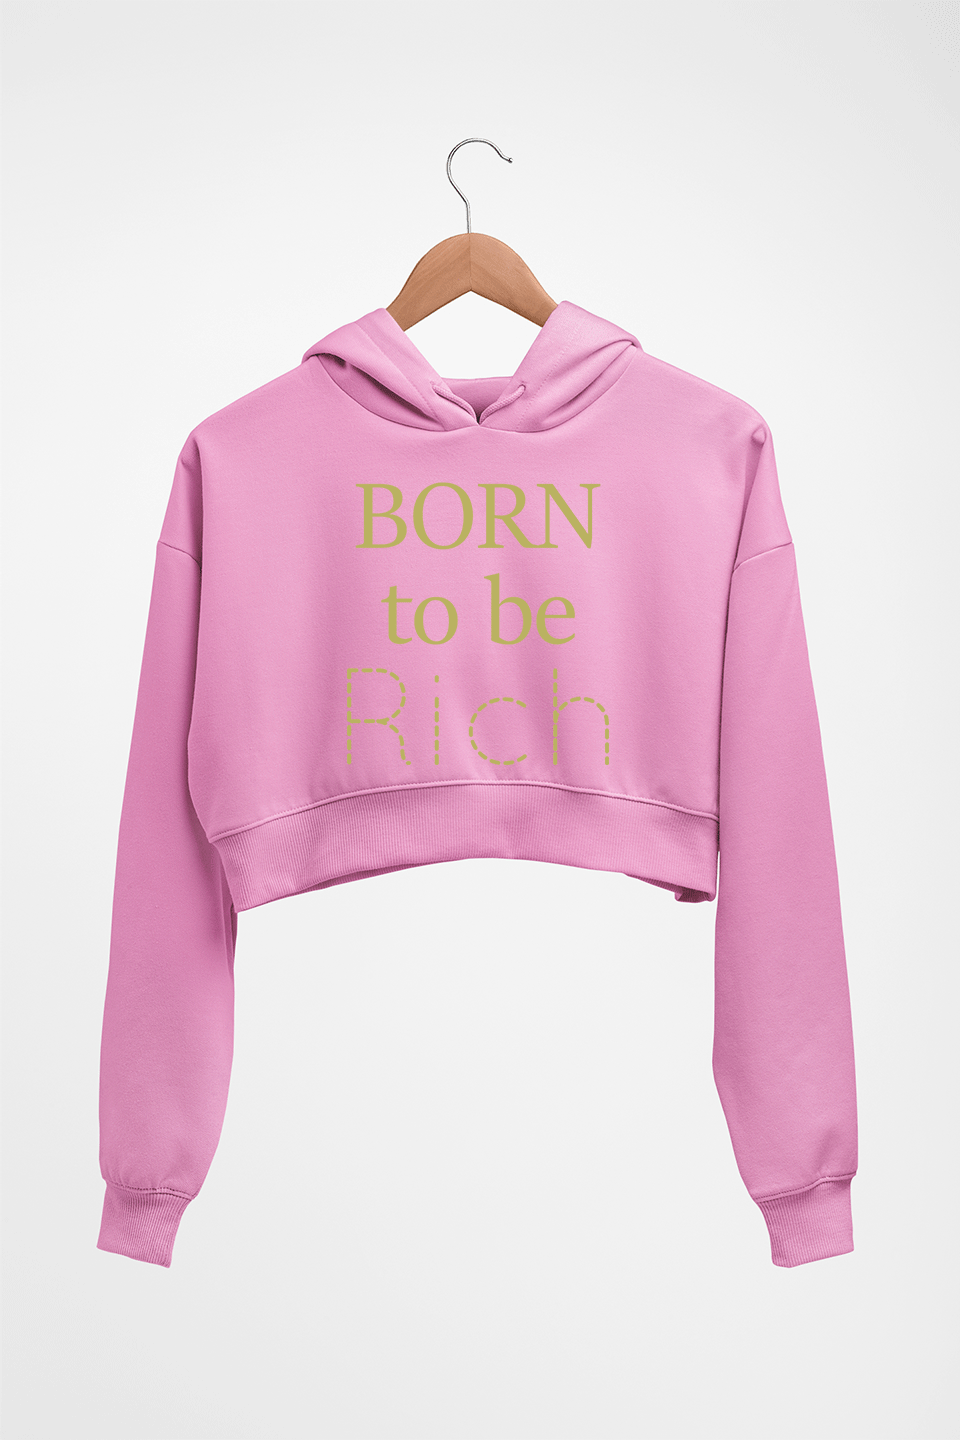 Born To be Rich Crop HOODIE FOR WOMEN